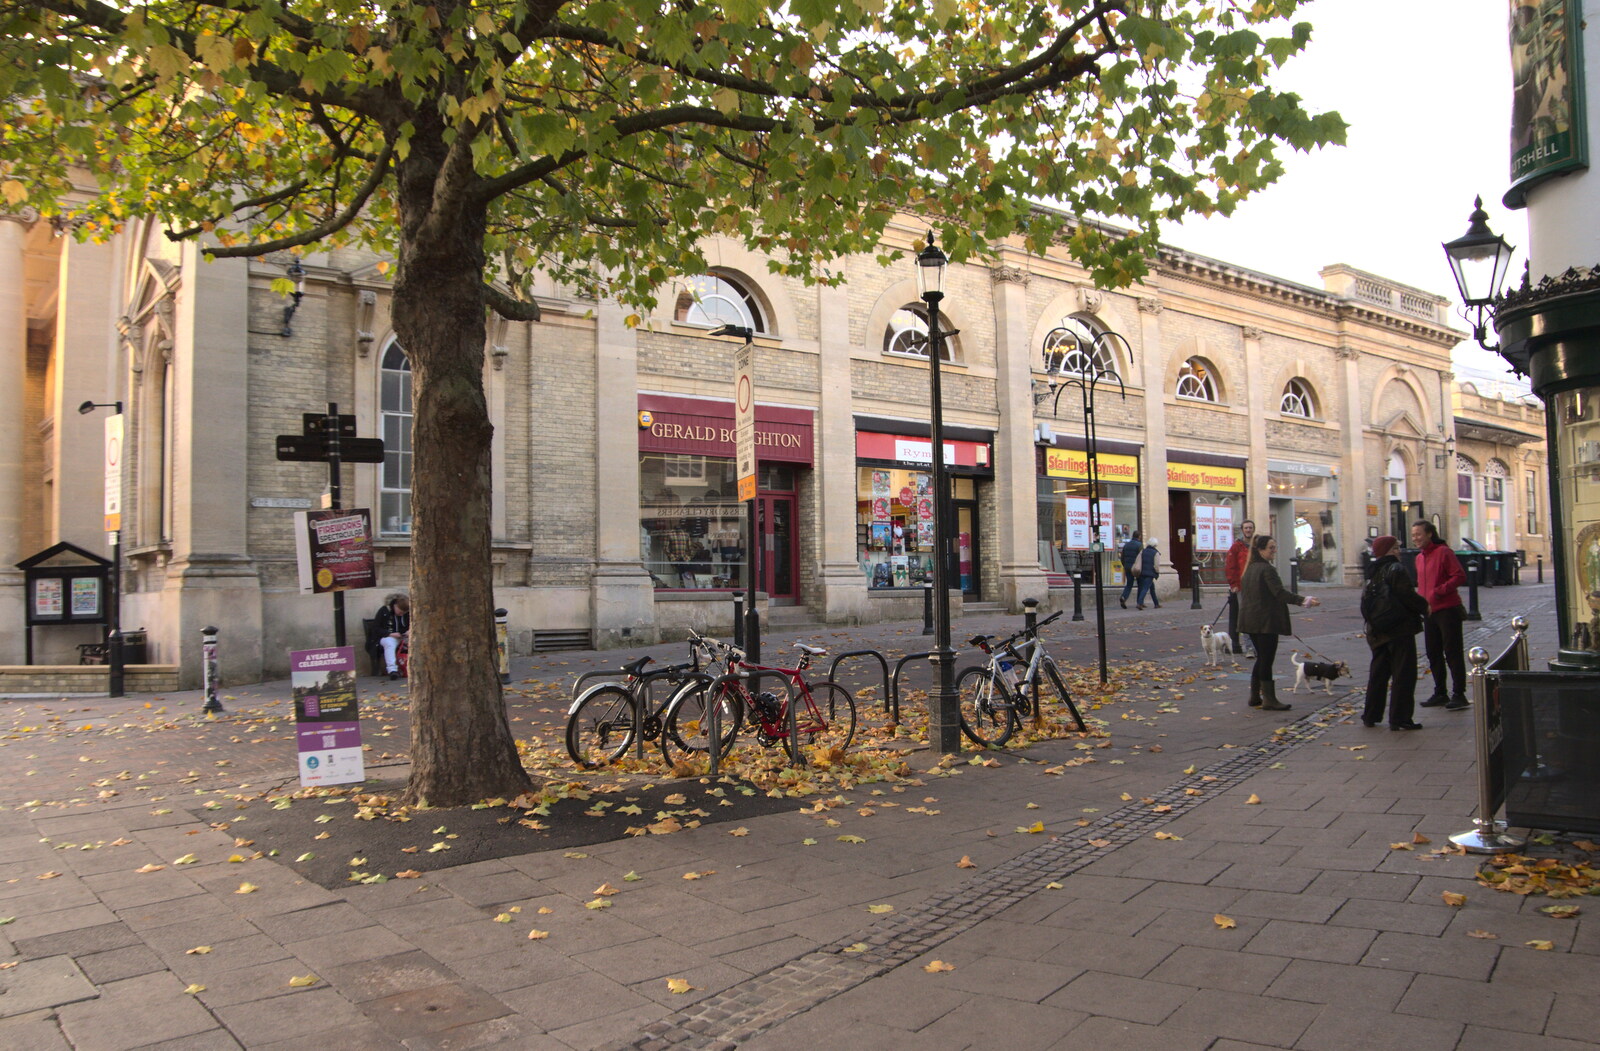 Pizza and Pasta in Bury St. Edmunds, Suffolk - 30th October 2022: Autumn leaves blow around on The Traverse